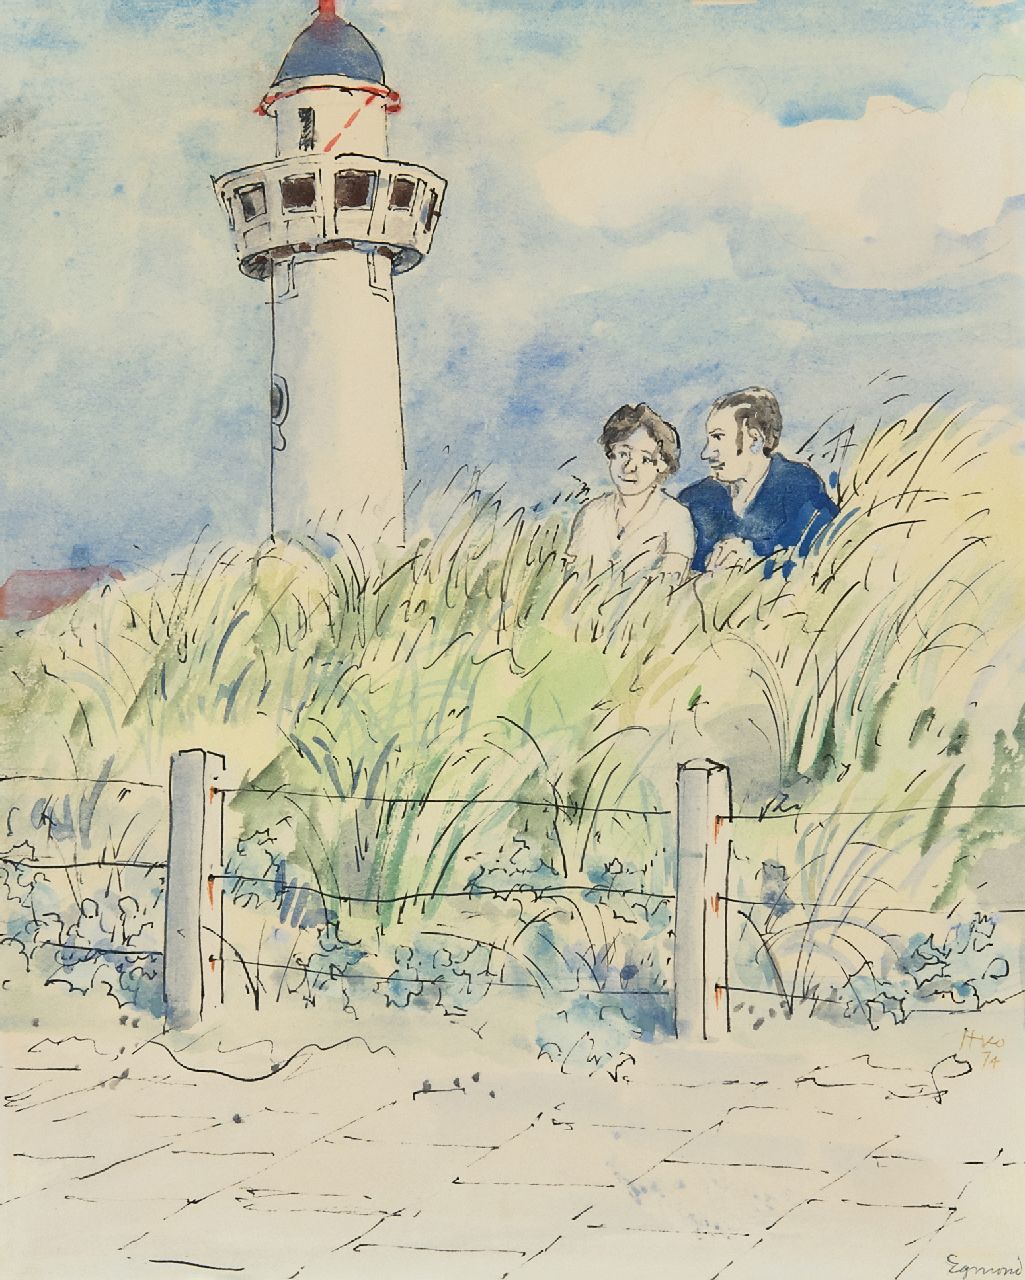 Kamerlingh Onnes H.H.  | 'Harm' Henrick Kamerlingh Onnes, A young couple in the dunes, Egmond aan Zee, pen, ink and watercolour on paper 25.7 x 21.0 cm, signed l.r. and dated '74